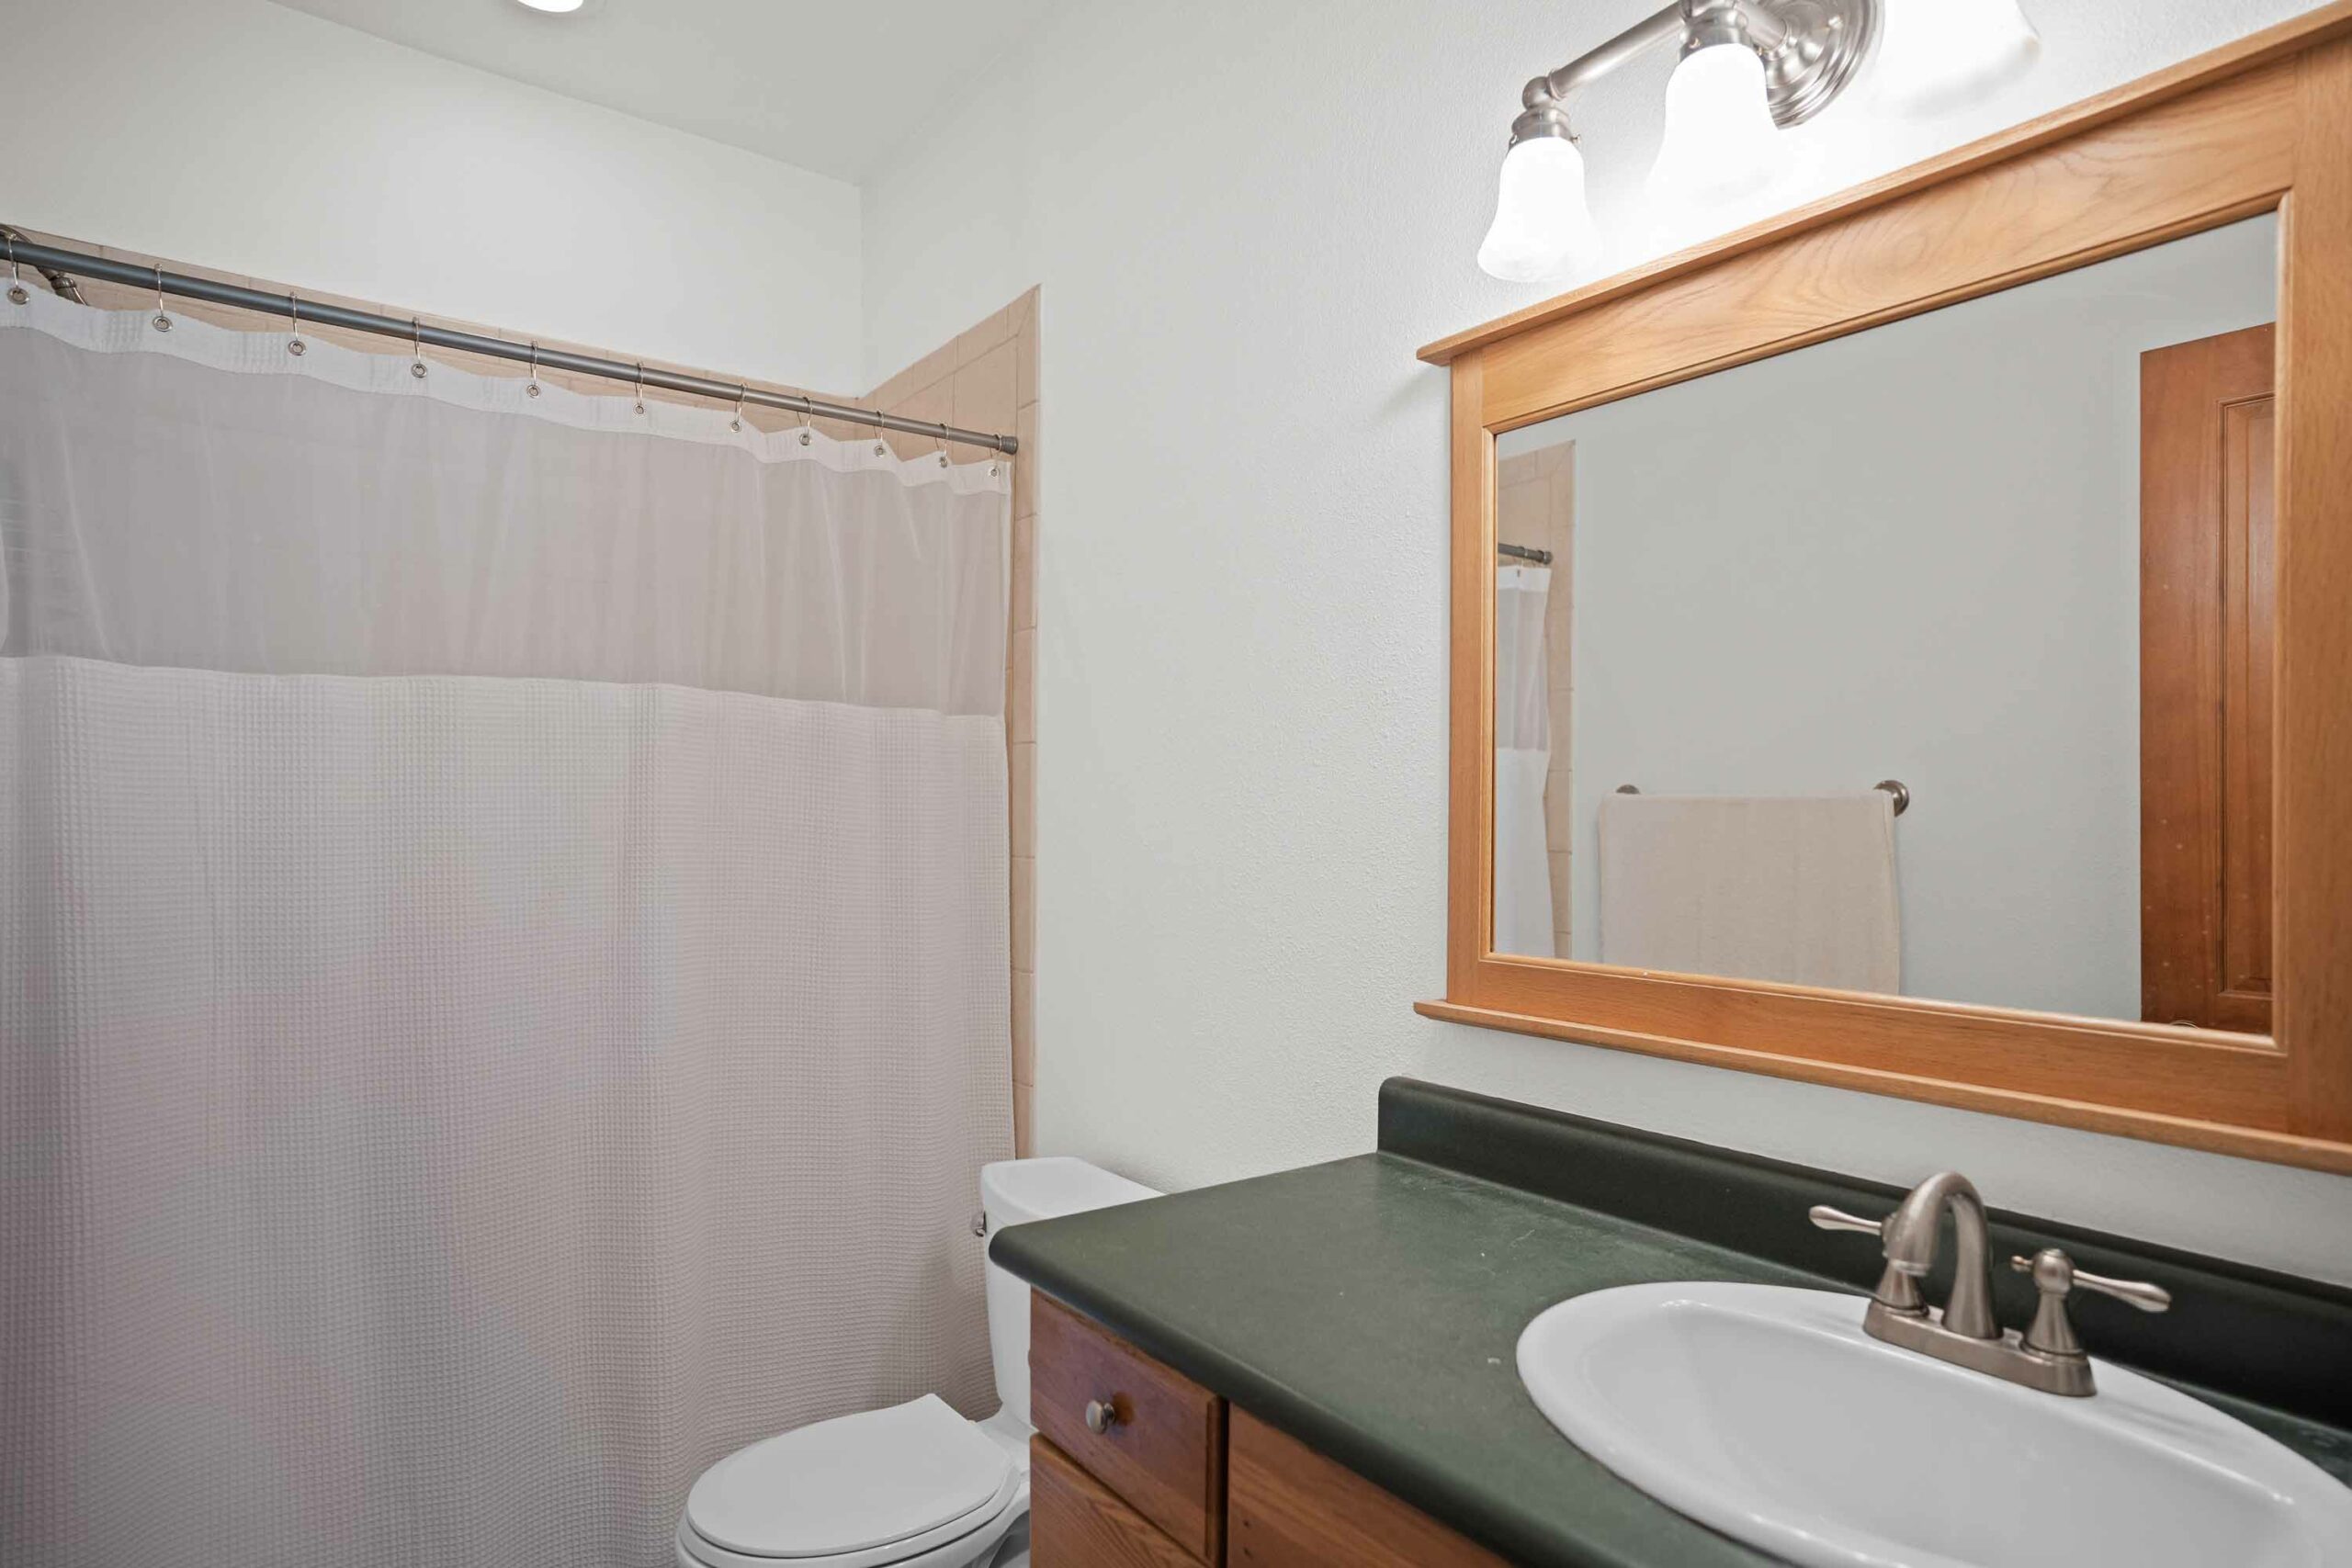 45 Creek Cove Crested Butte, CO -Garage Apartment Bathroom